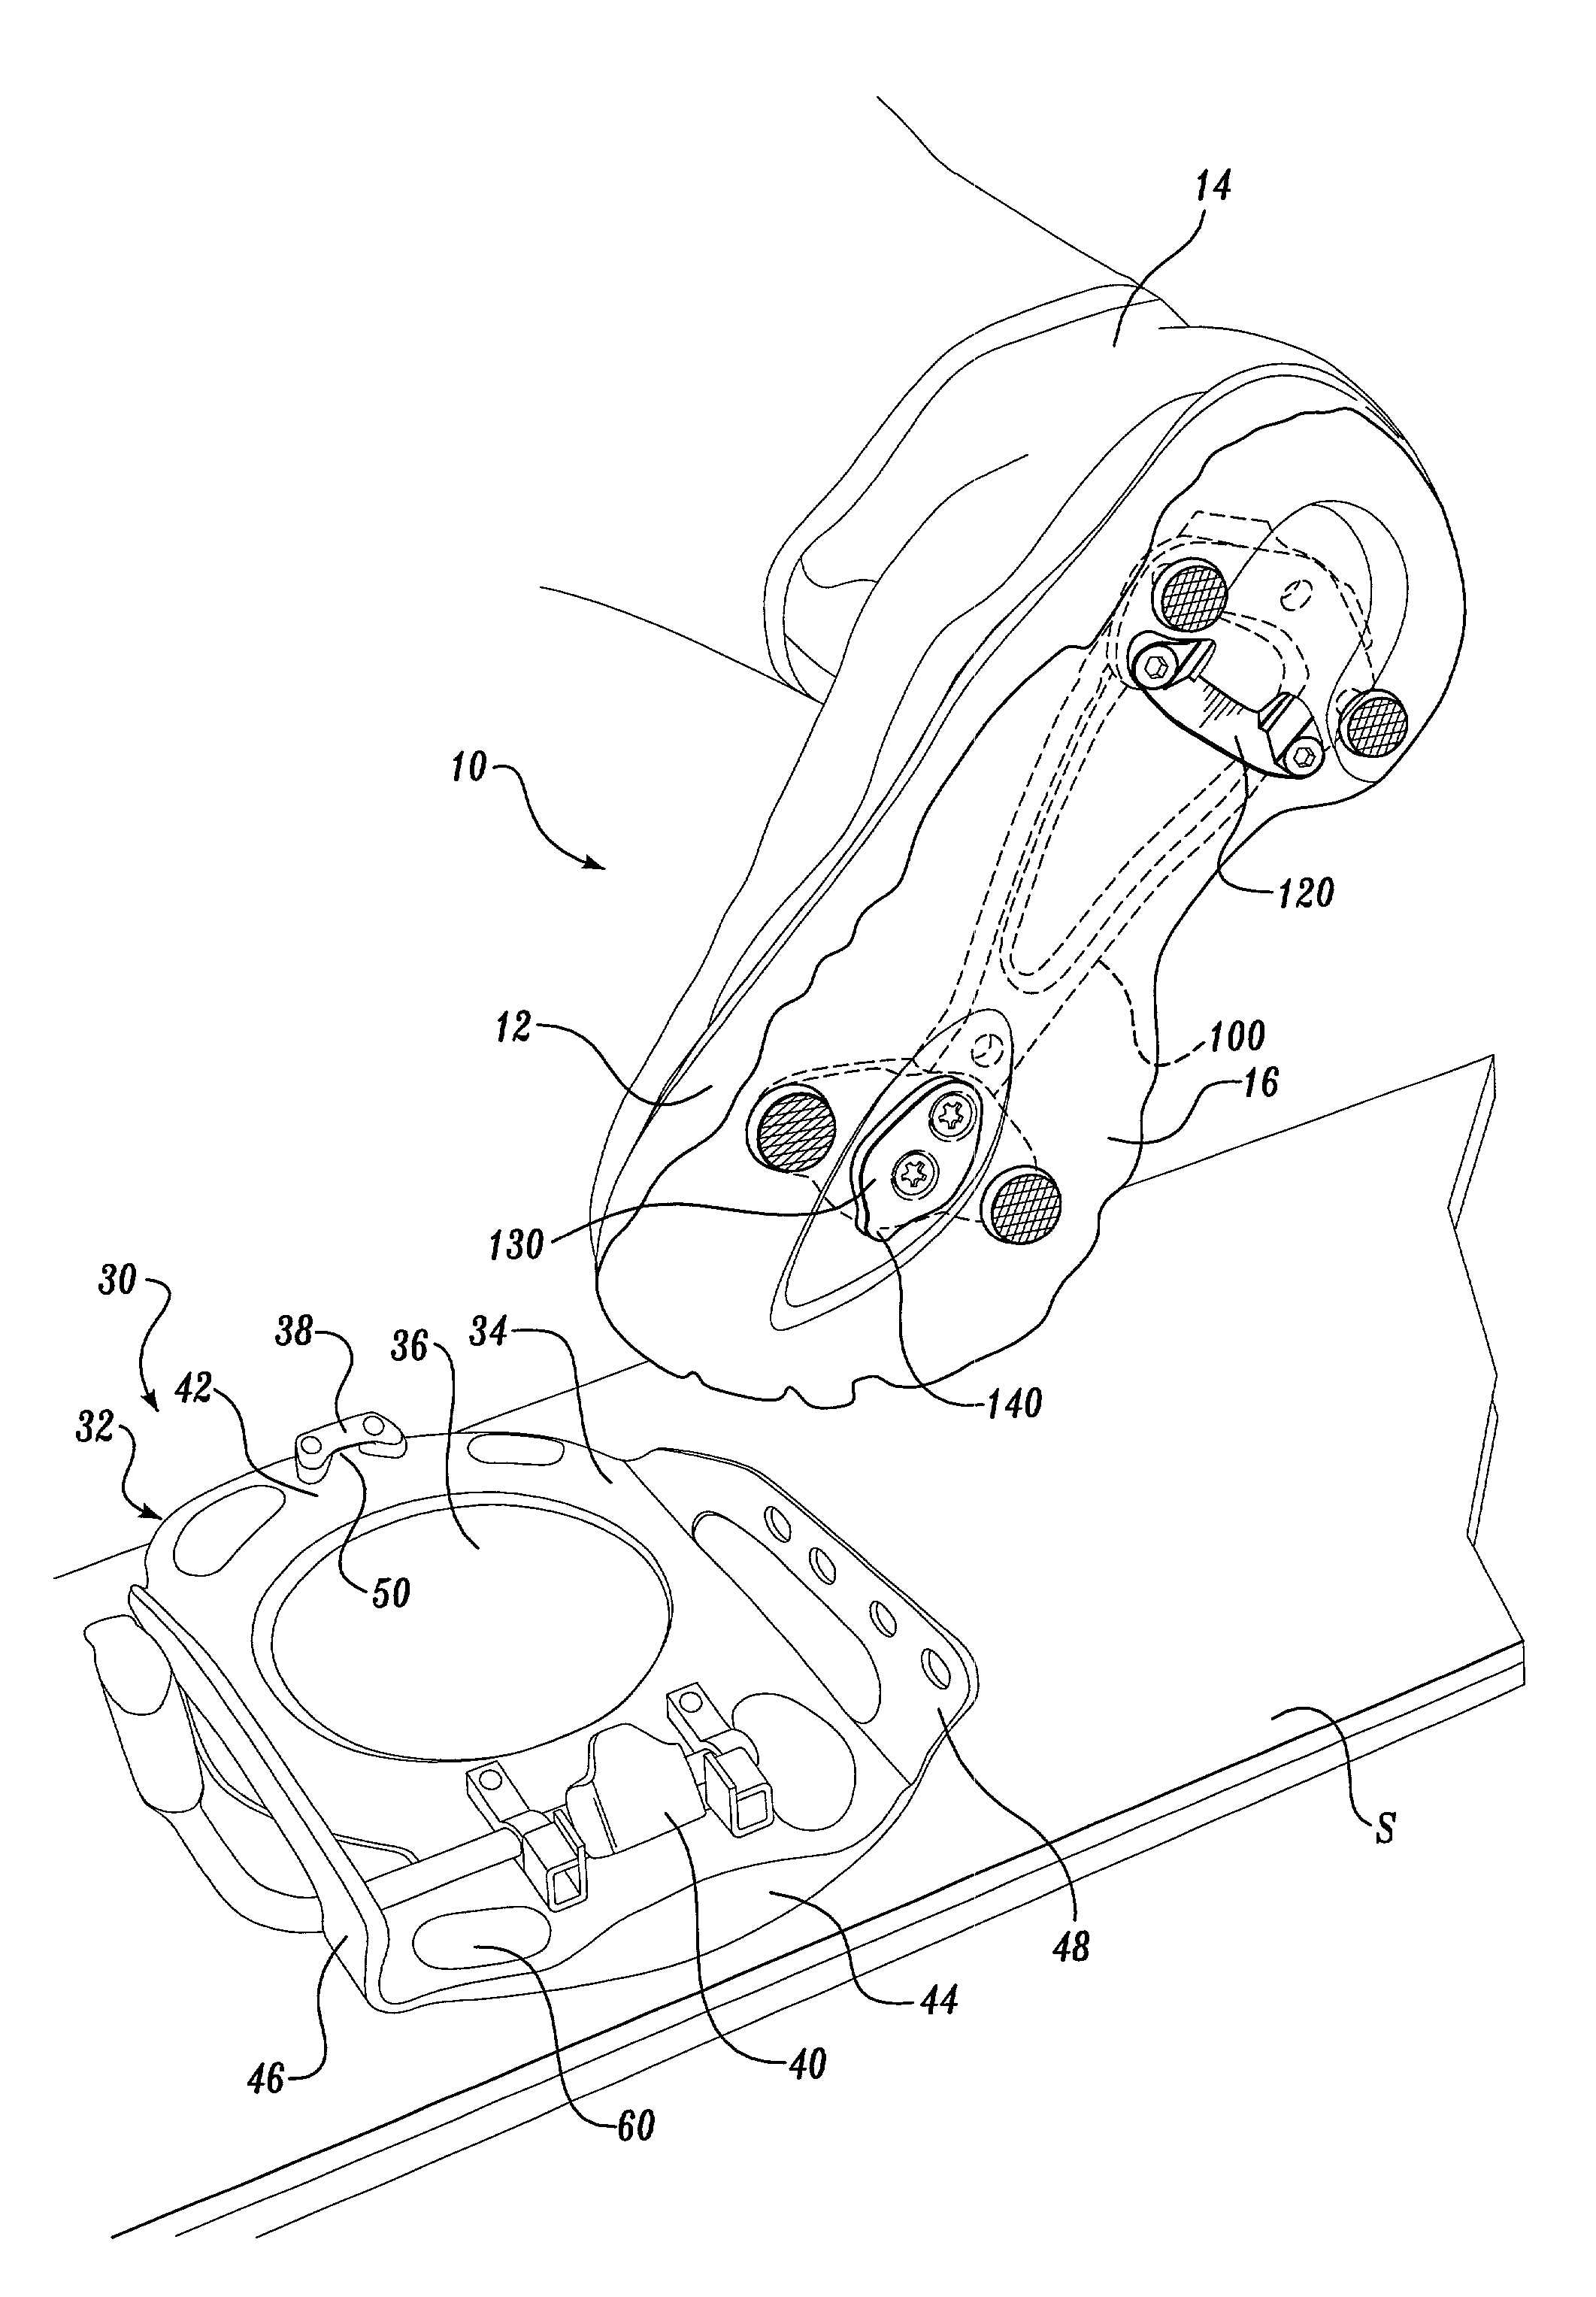 Athletic boot with interface adjustment mechanism